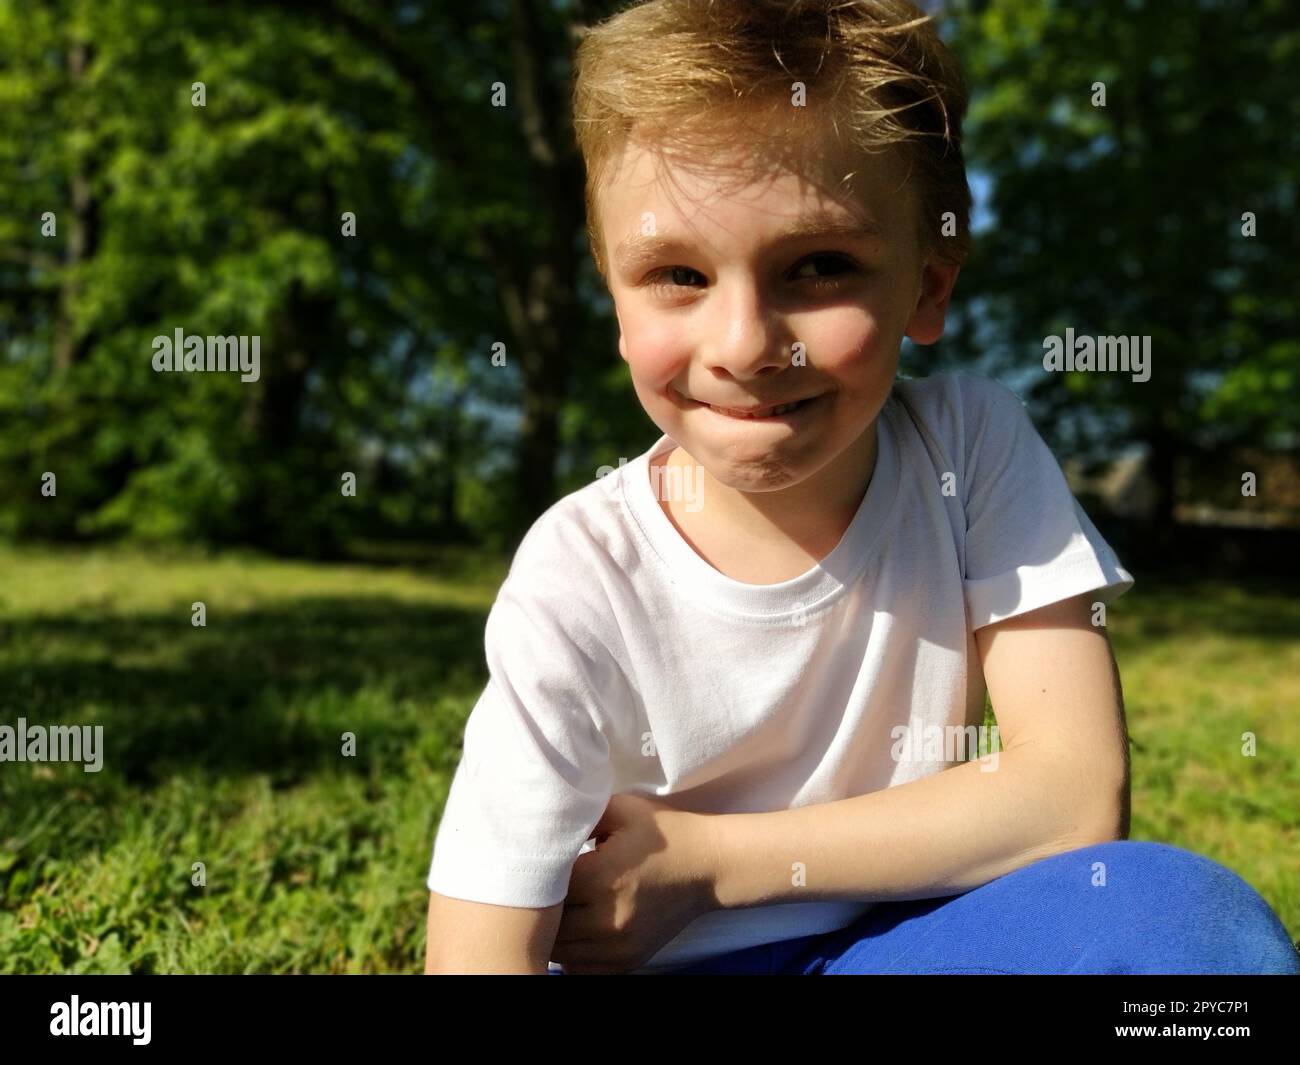 A cute young boy smiling and looks to the side. The child is dressed in a white T-shirt and blue pants. Blond hair is beautiful fall on the forehead. Long blonde eyelashes. Park in the background. Stock Photo